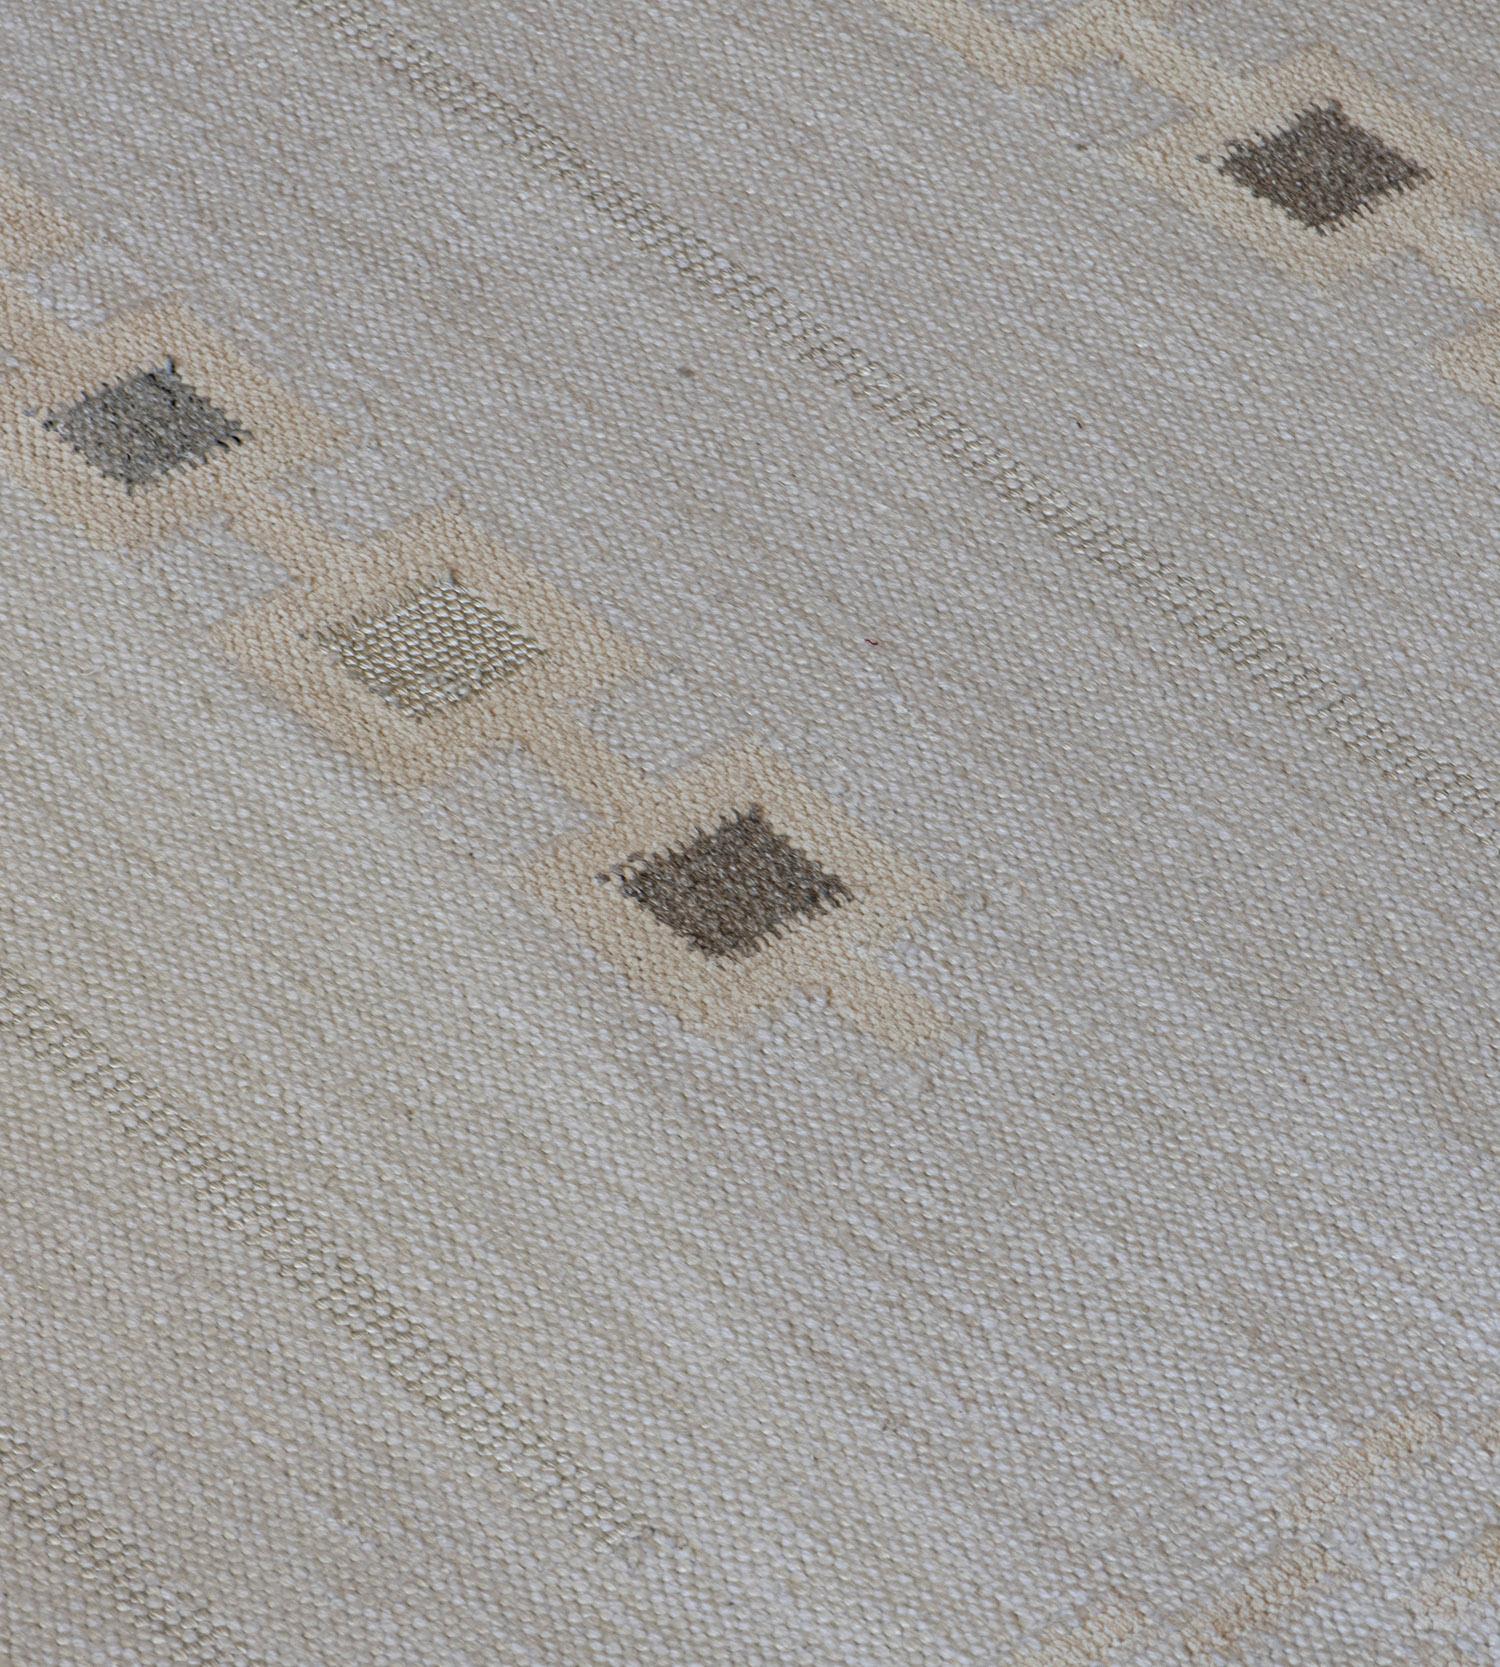 The Mansour modern Swedish collection is primarily inspired by vintage Swedish flat-weave rugs whose geometric designs are relevant as ever in the 21st century. The collection utilizes a number of flat-weave techniques, yielding various distinctive